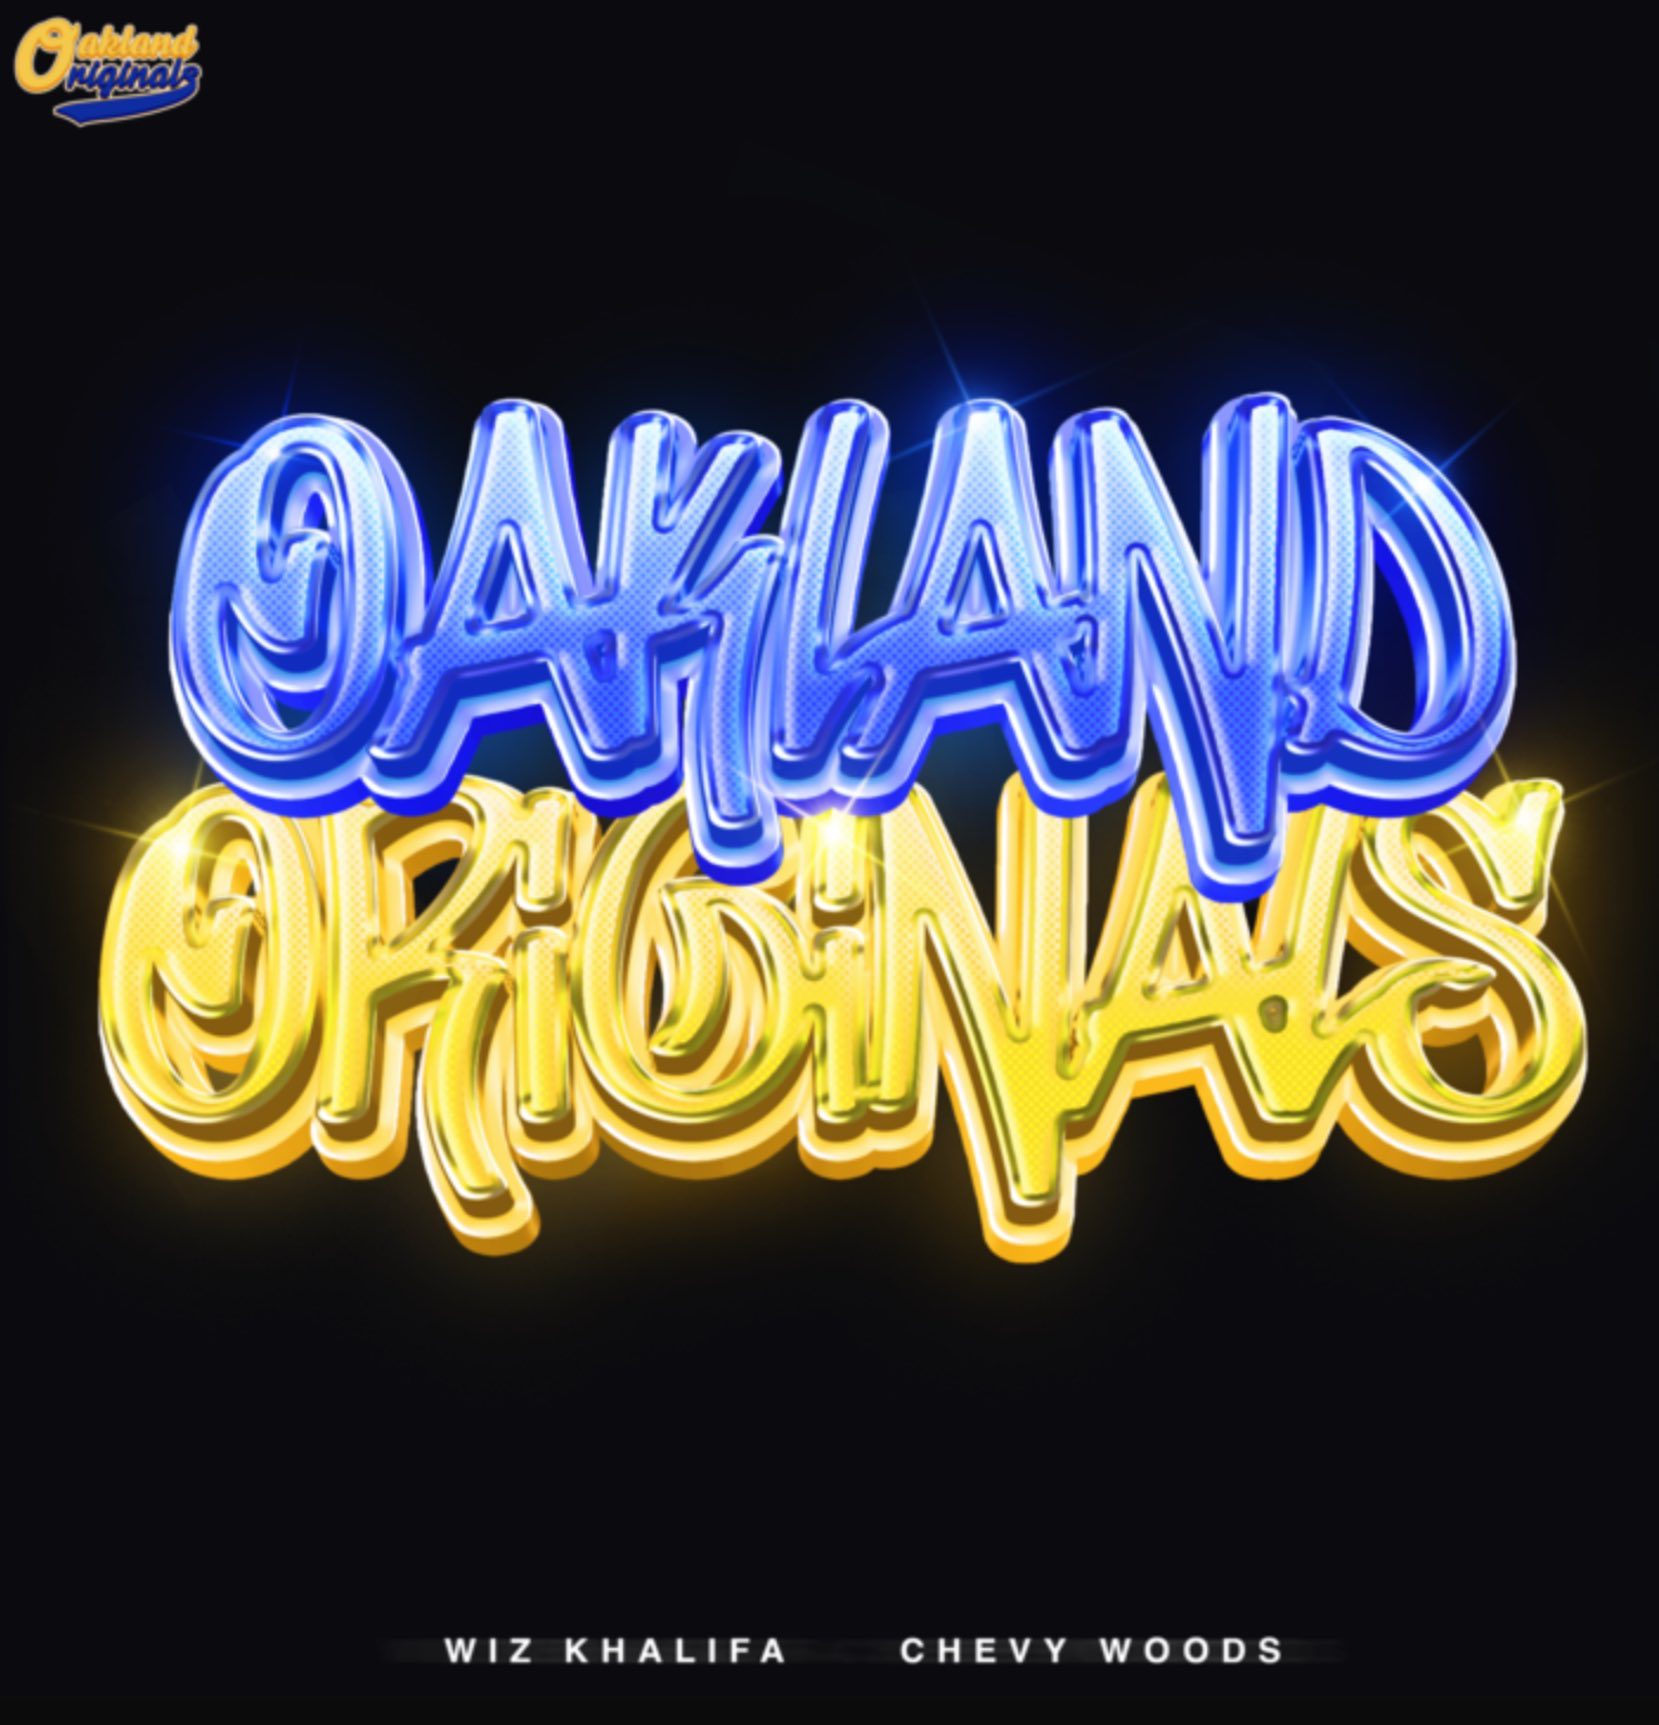 Pittsburgh rappers Wiz Khalifa and Chevy Woods released "Oakland Originals" a new Pitt hype song through the Named NIL Collective.